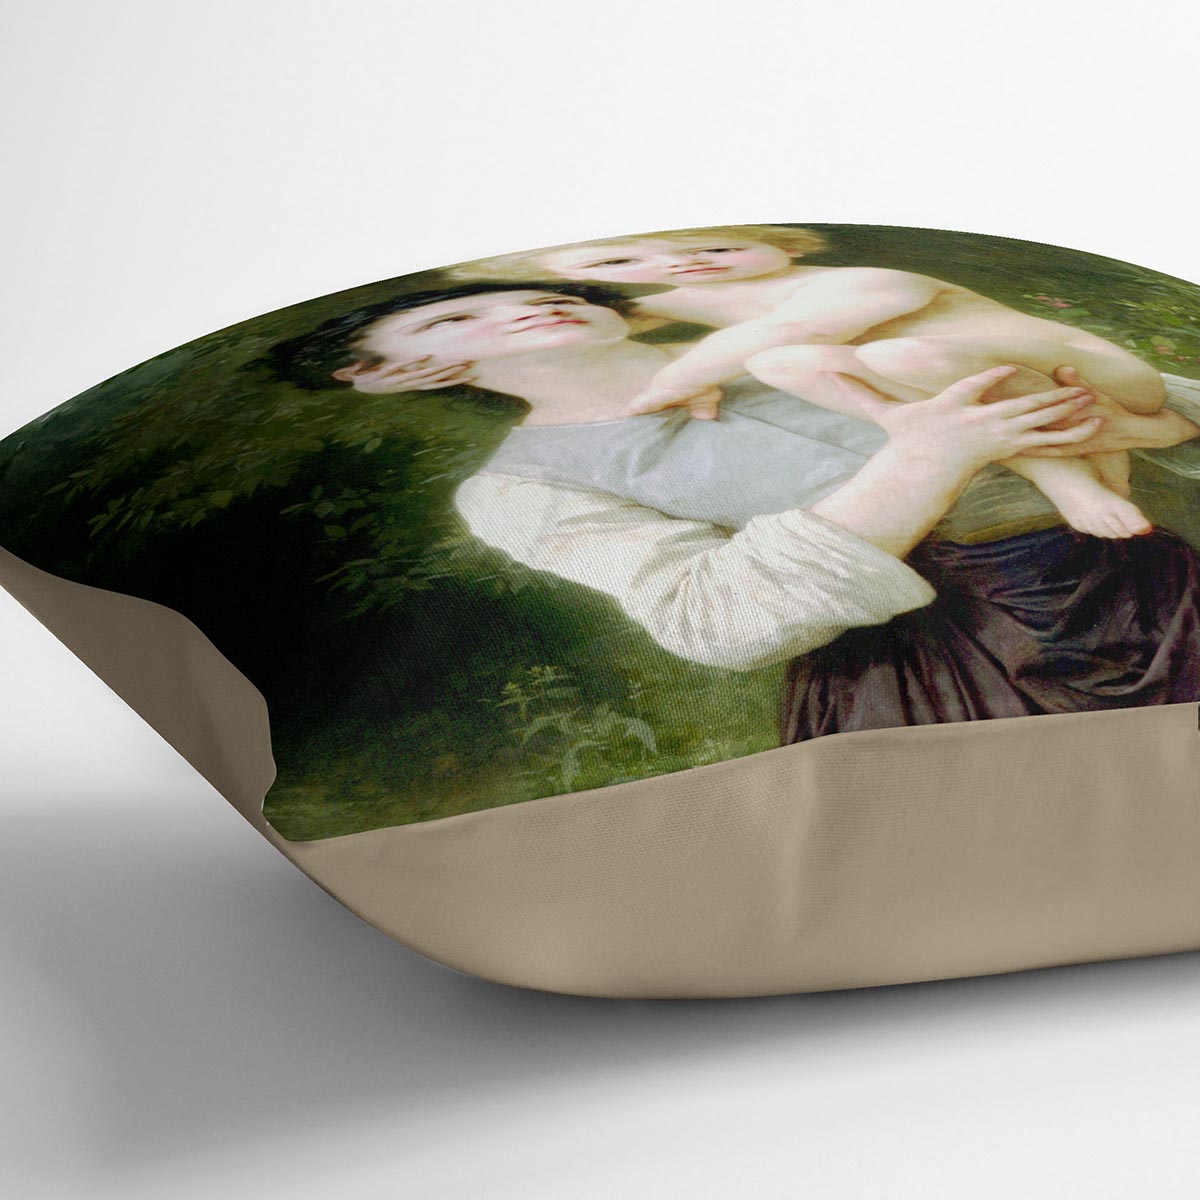 Brother And Sister By Bouguereau Cushion